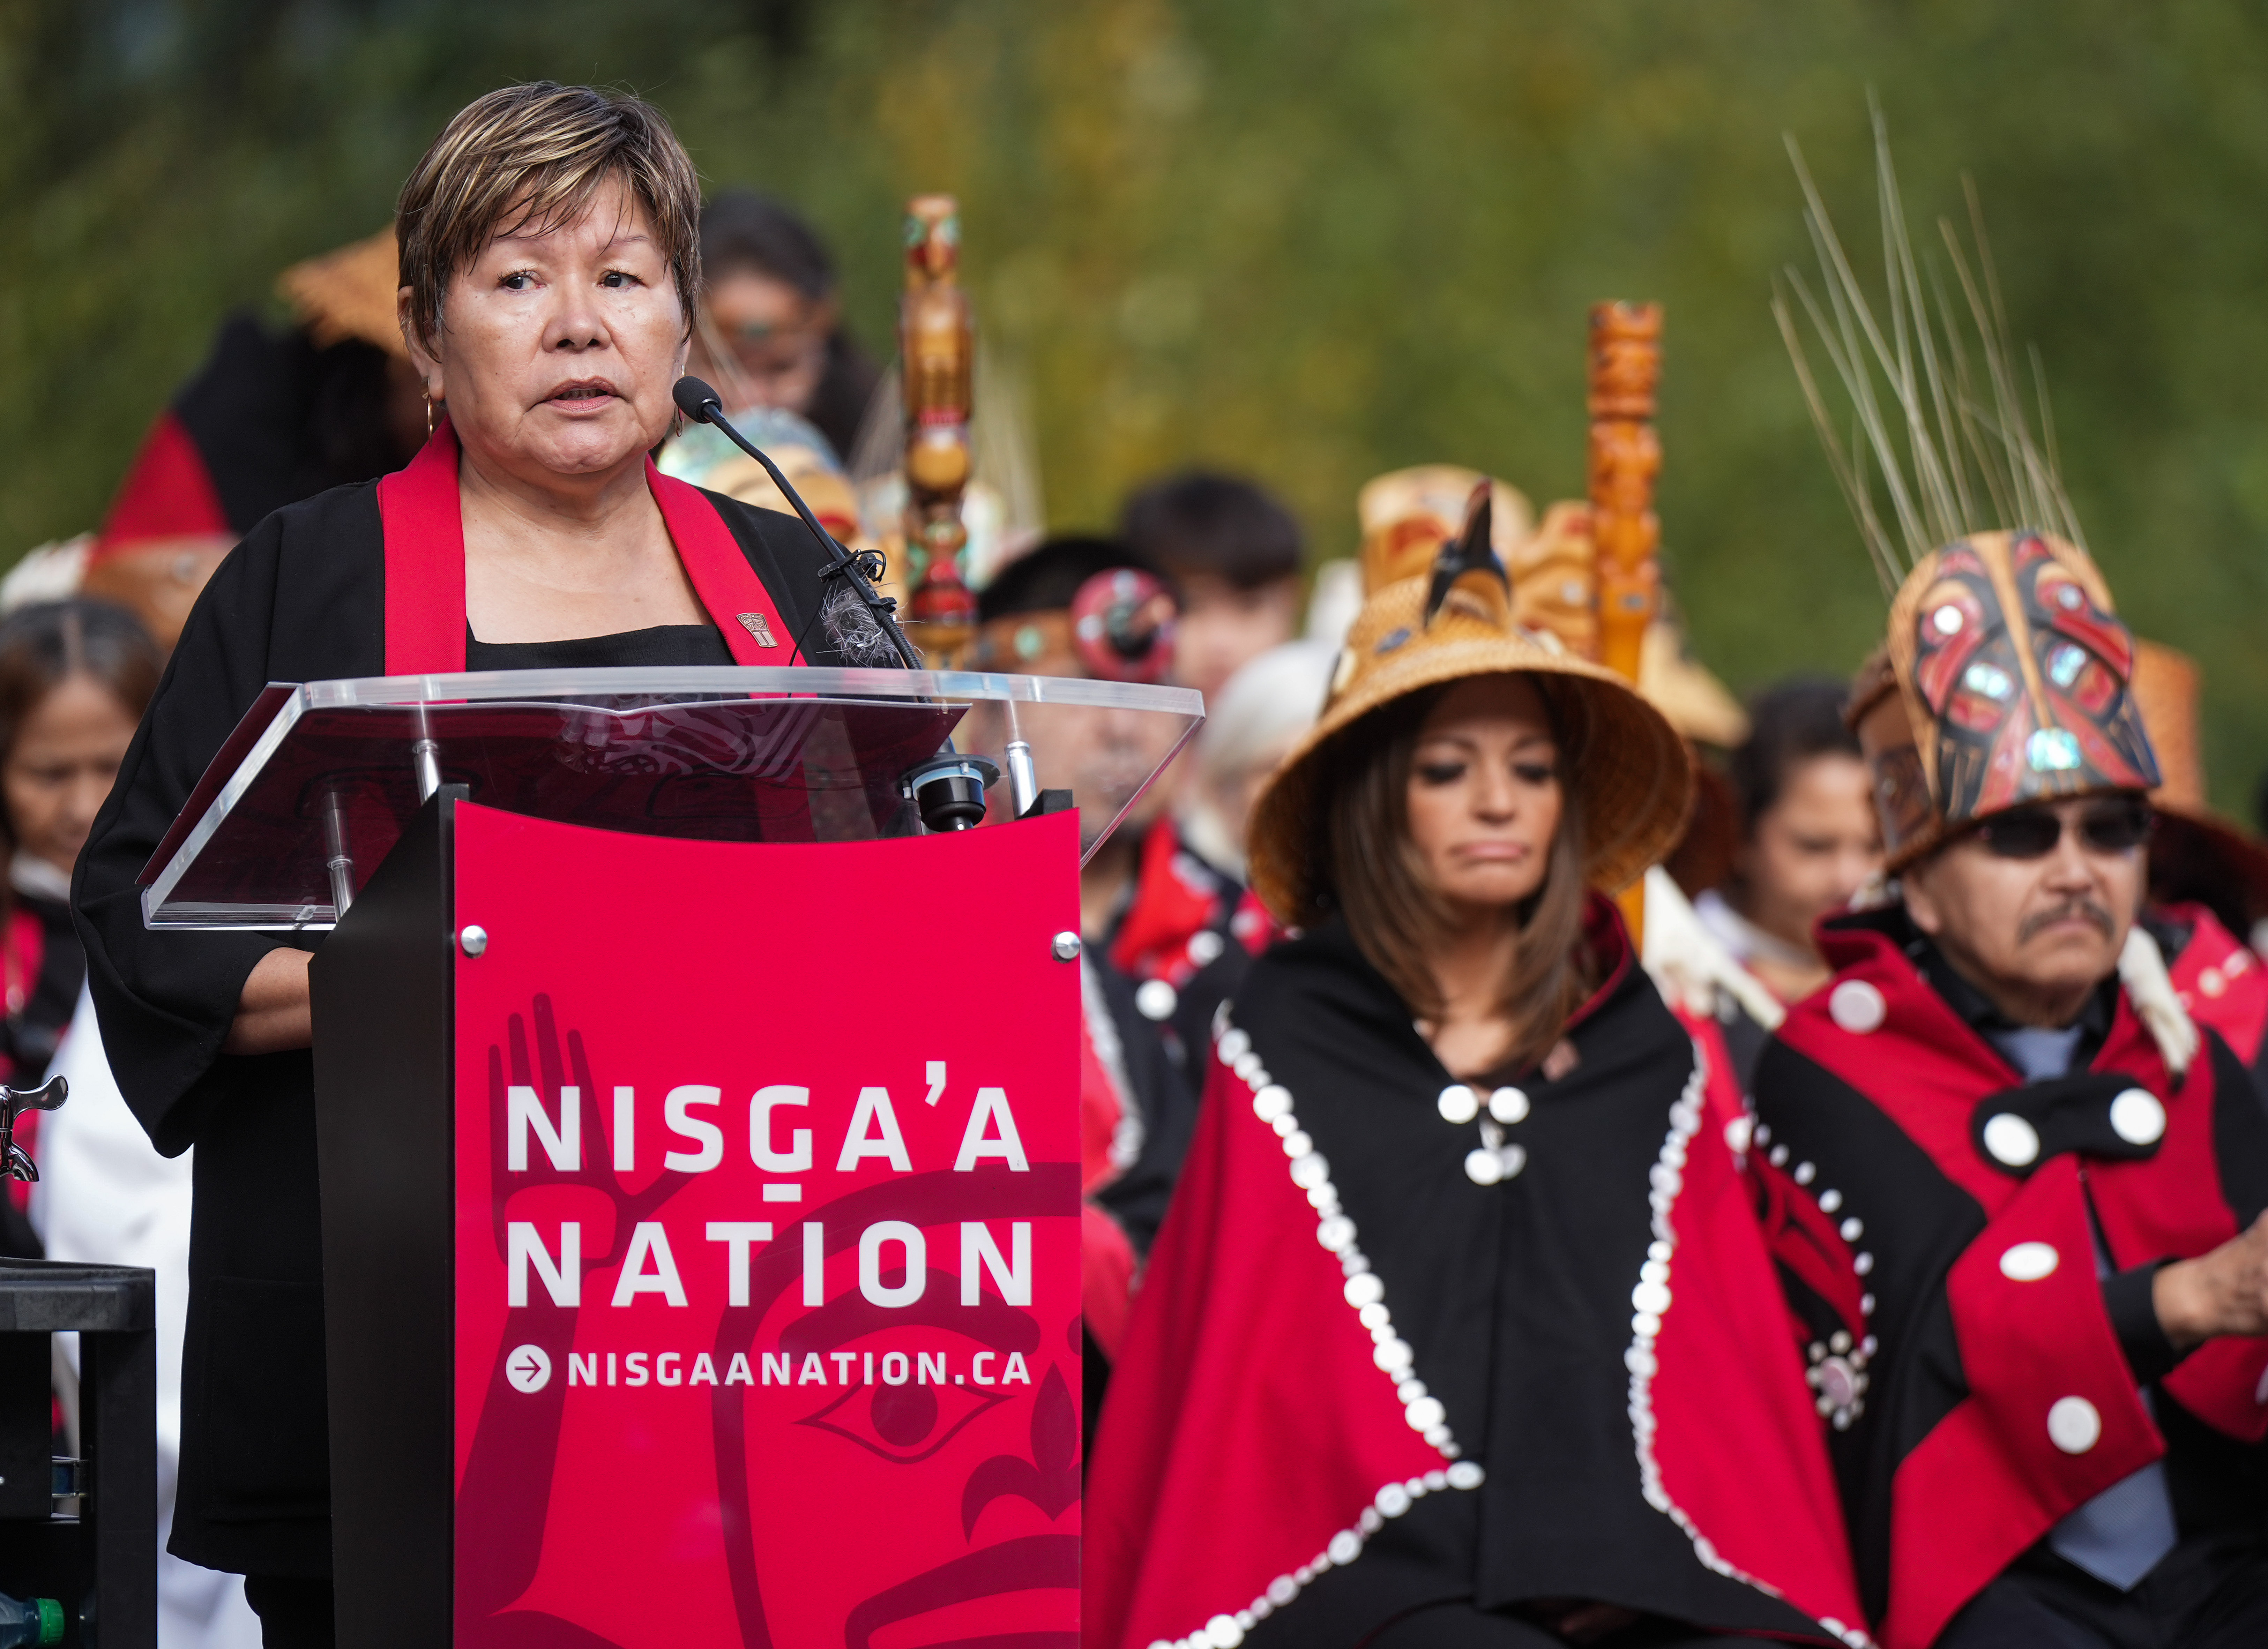 Nisg̱a’a Lisims government sues ‘illegal occupants’ for interfering with their treaty rights